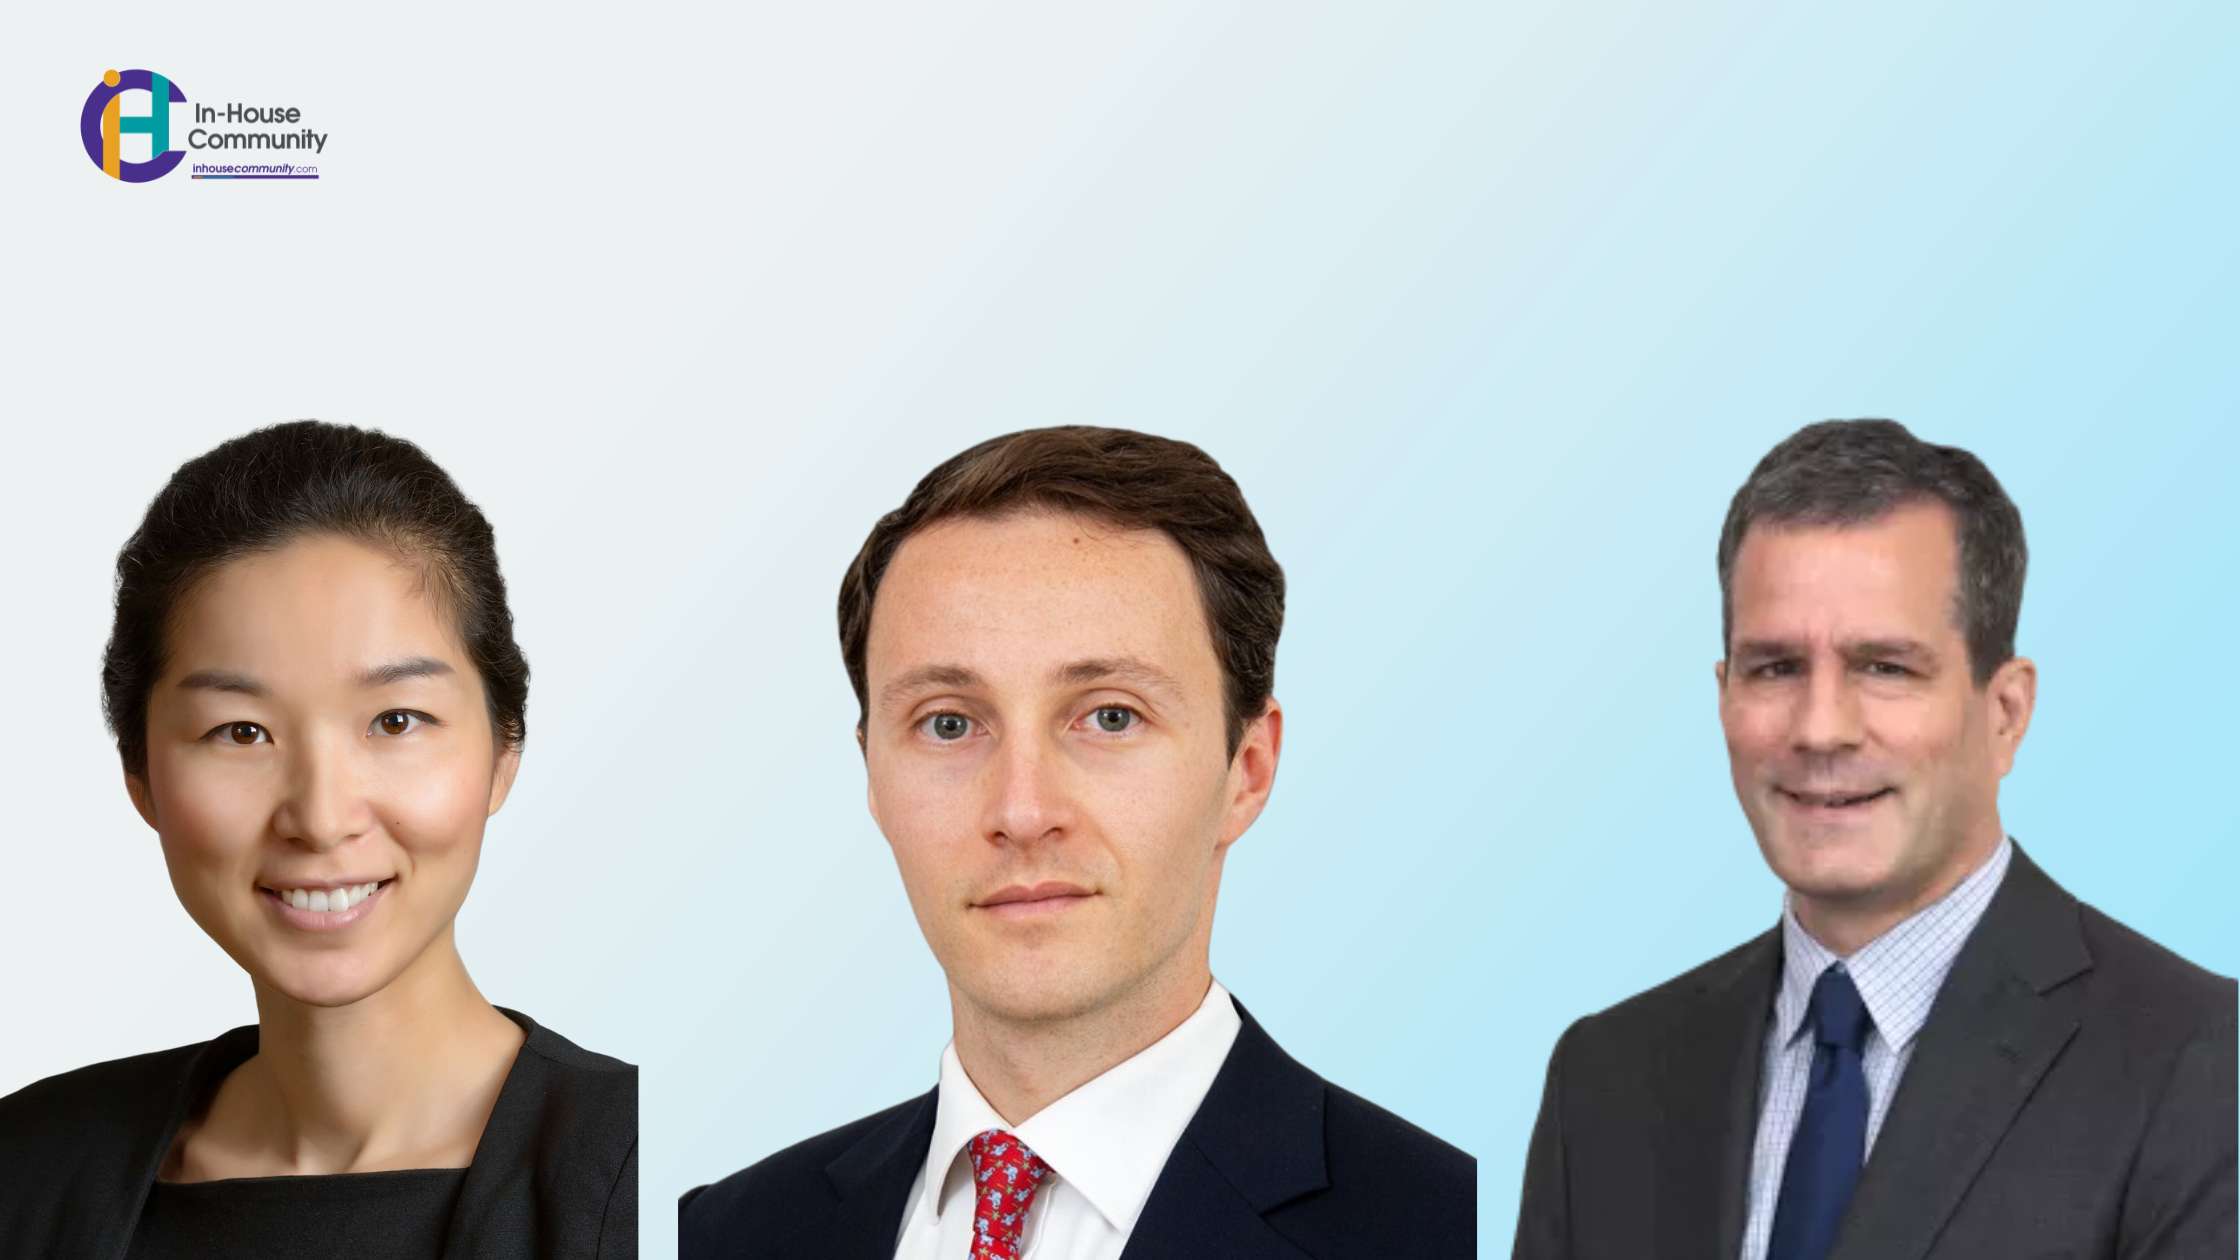 Ashurst boosts global energy team with 5 partner hires